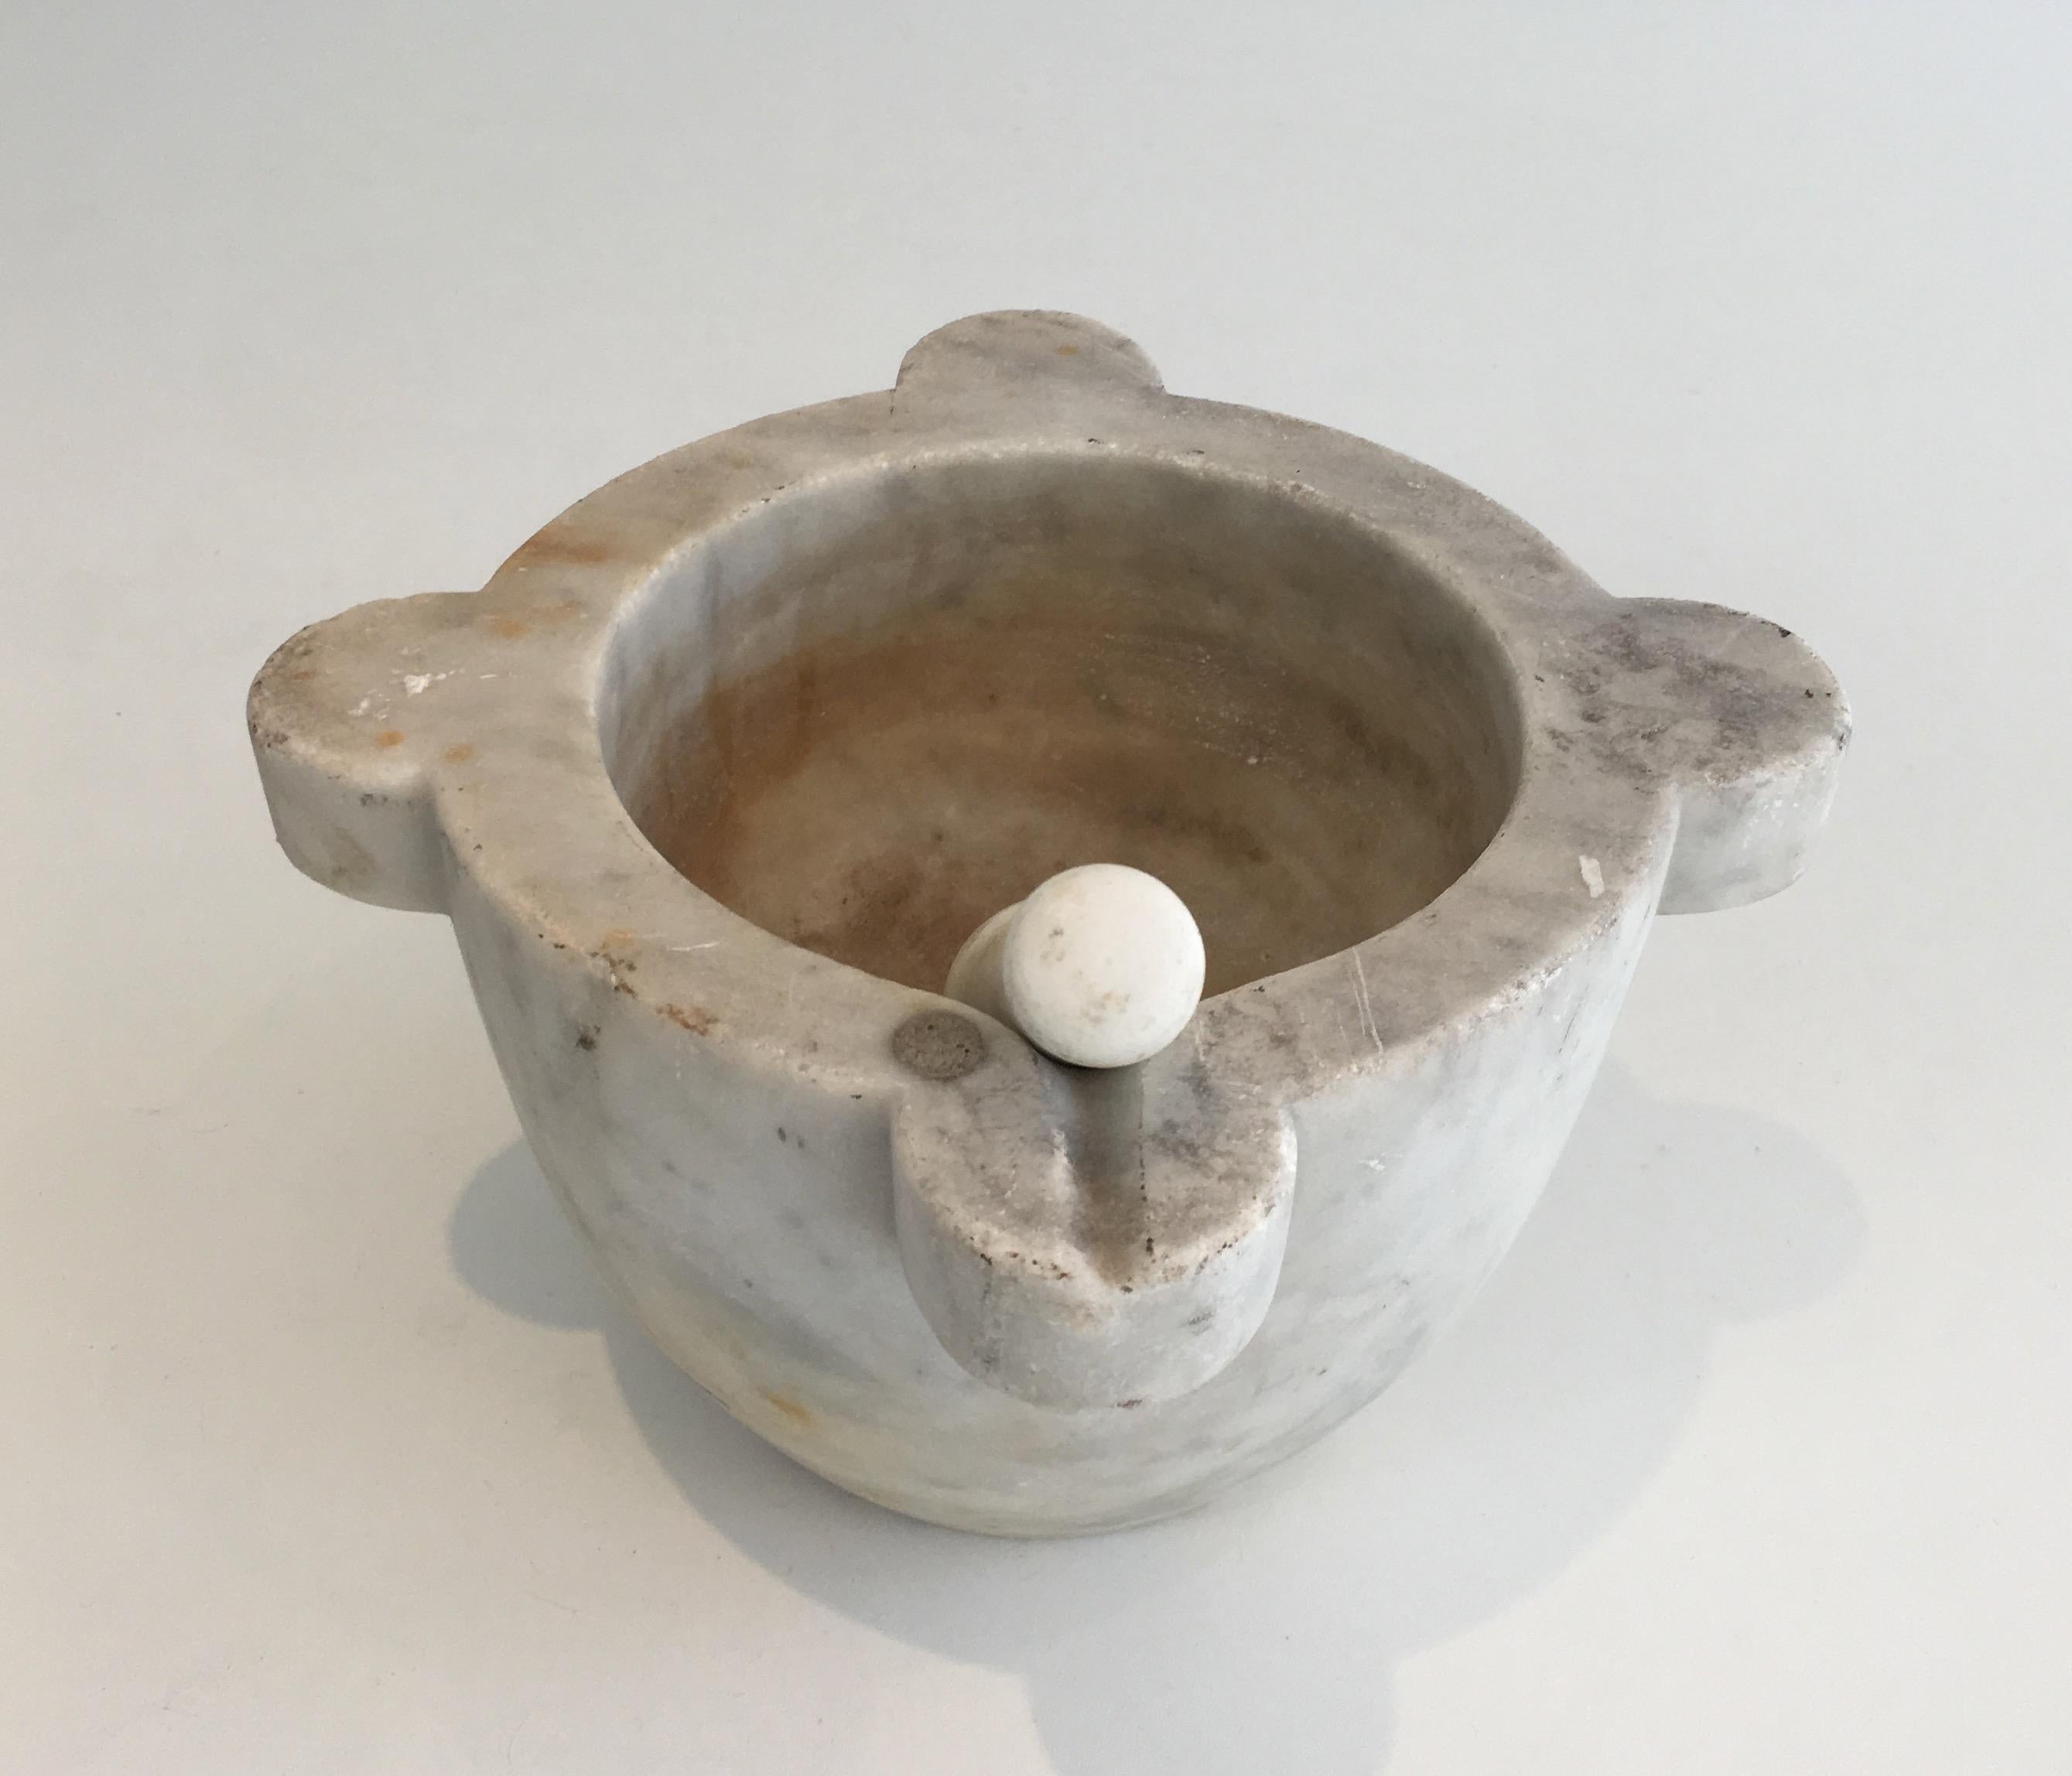 This mortar is made of white marble with a wooden pestle. This is a French work made in 18th century.